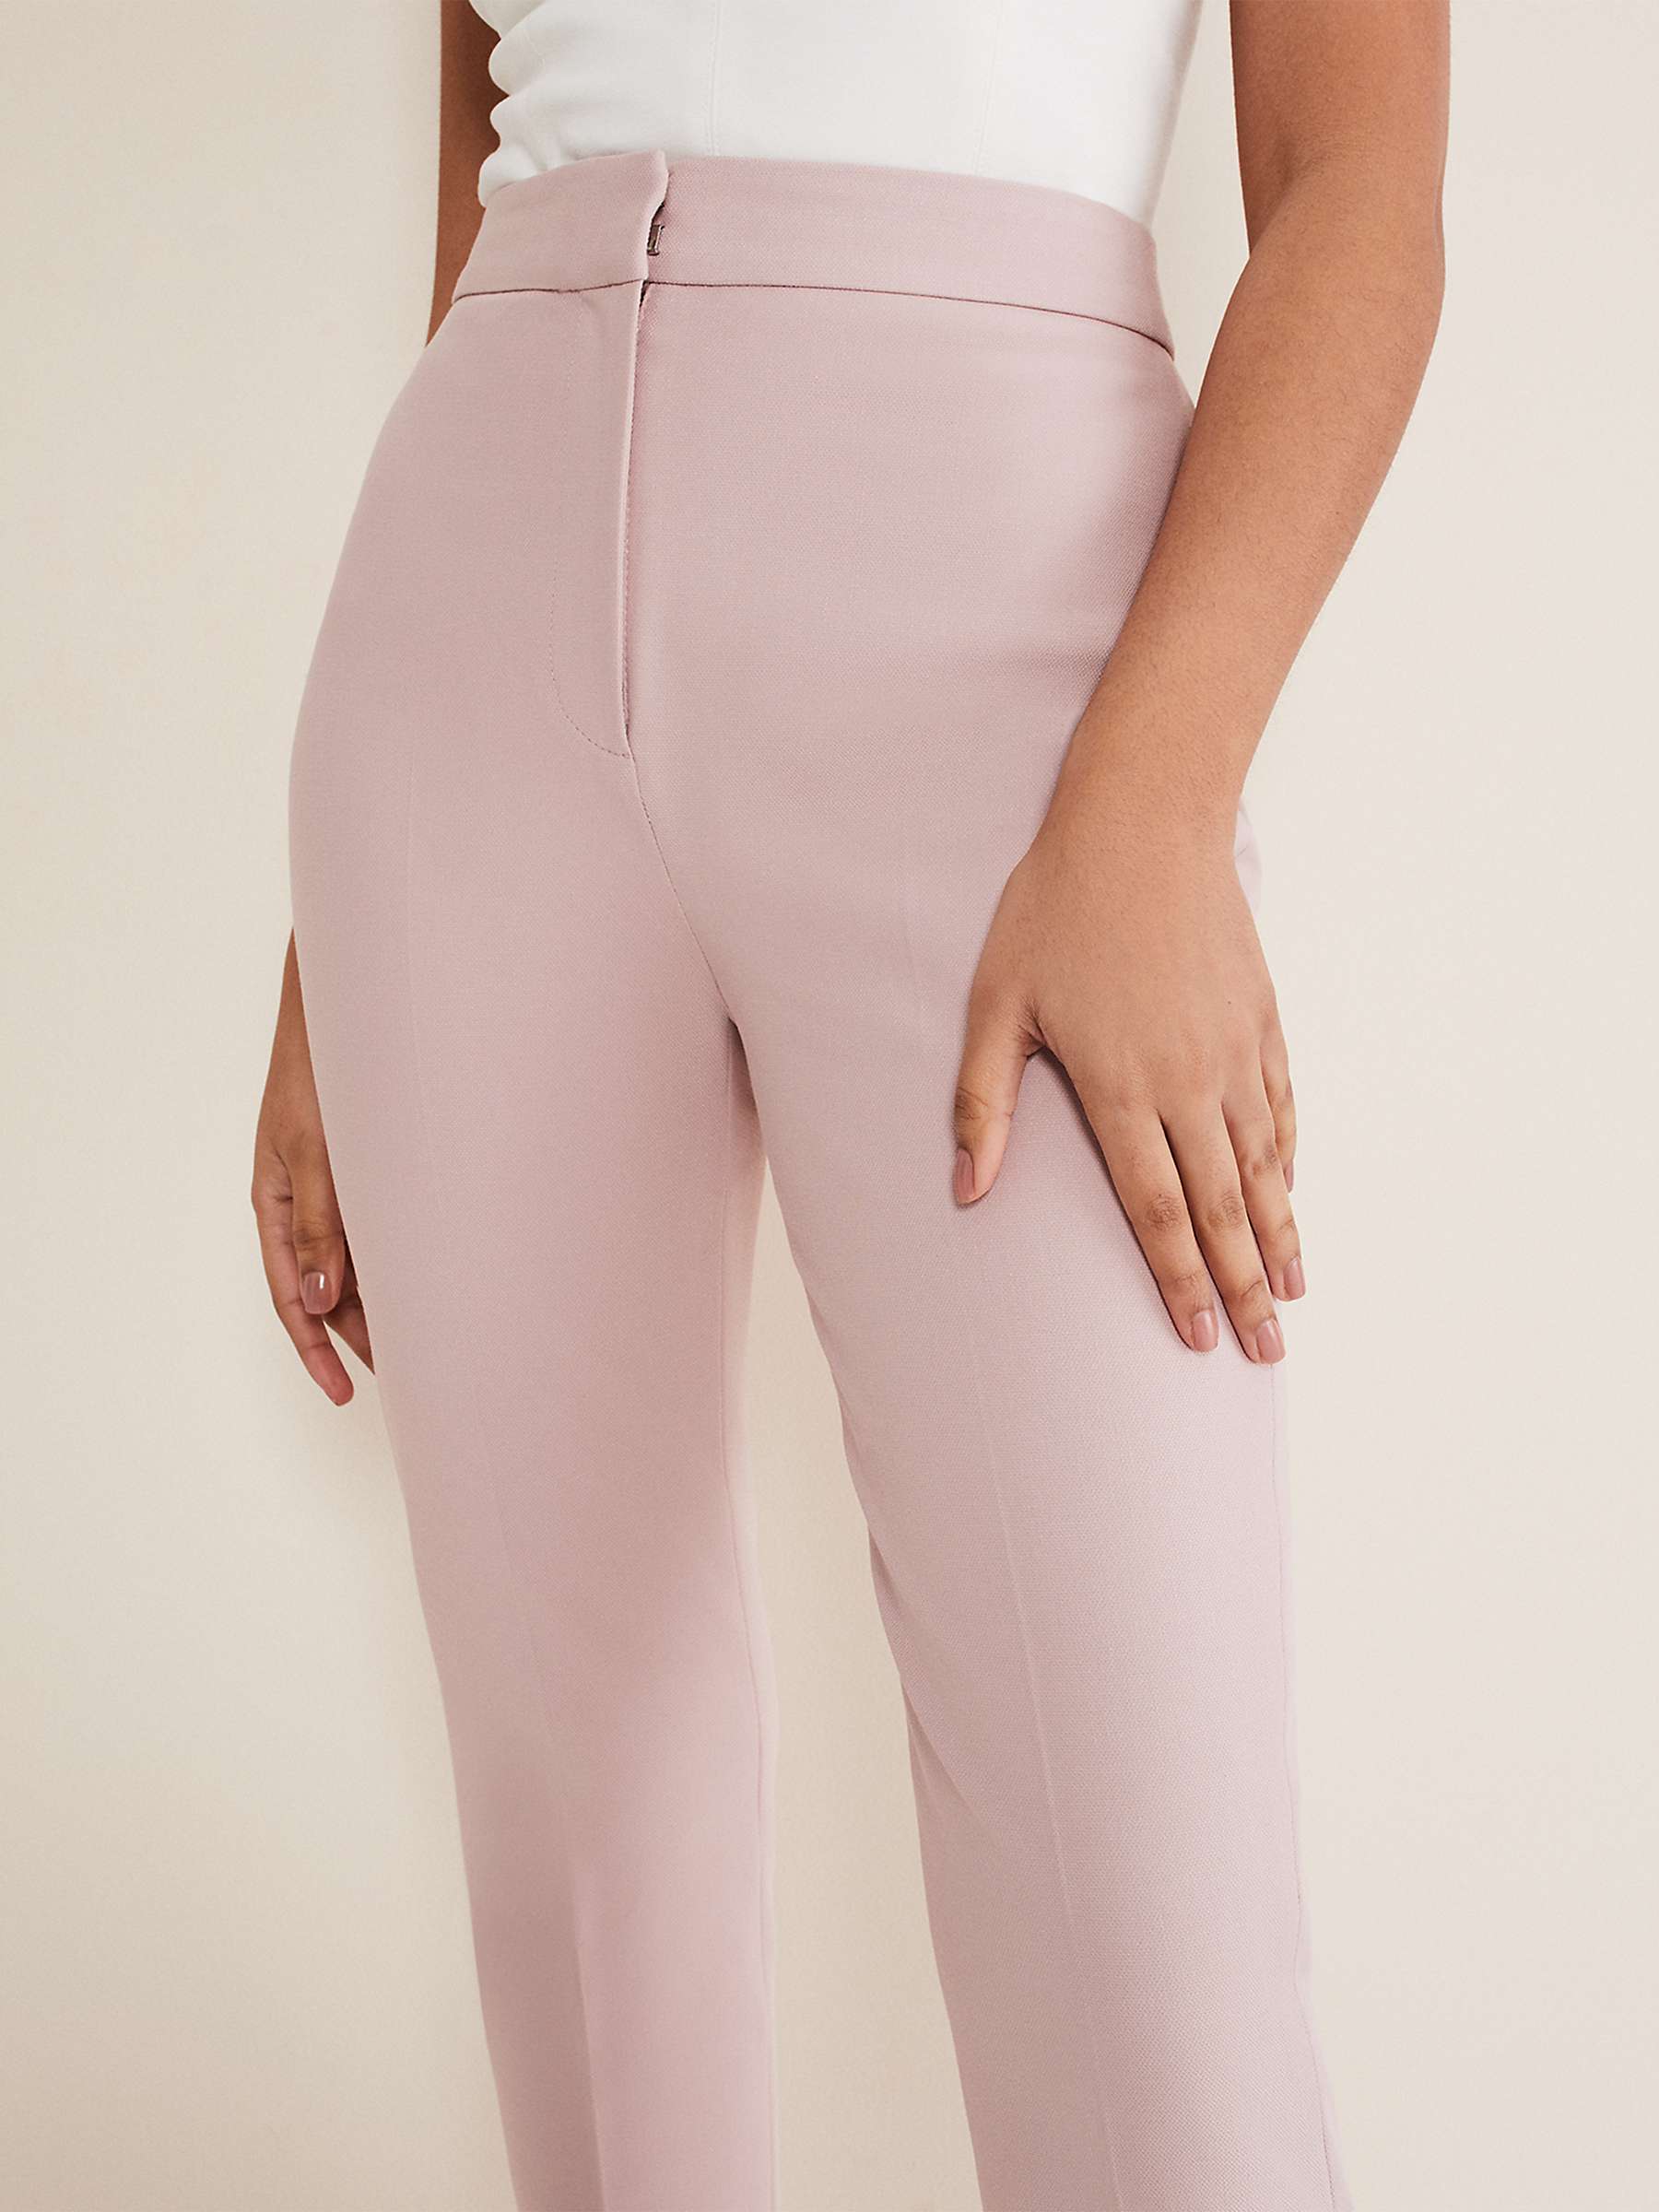 Buy Phase Eight Petite Eira Trousers, Soft Pink Online at johnlewis.com